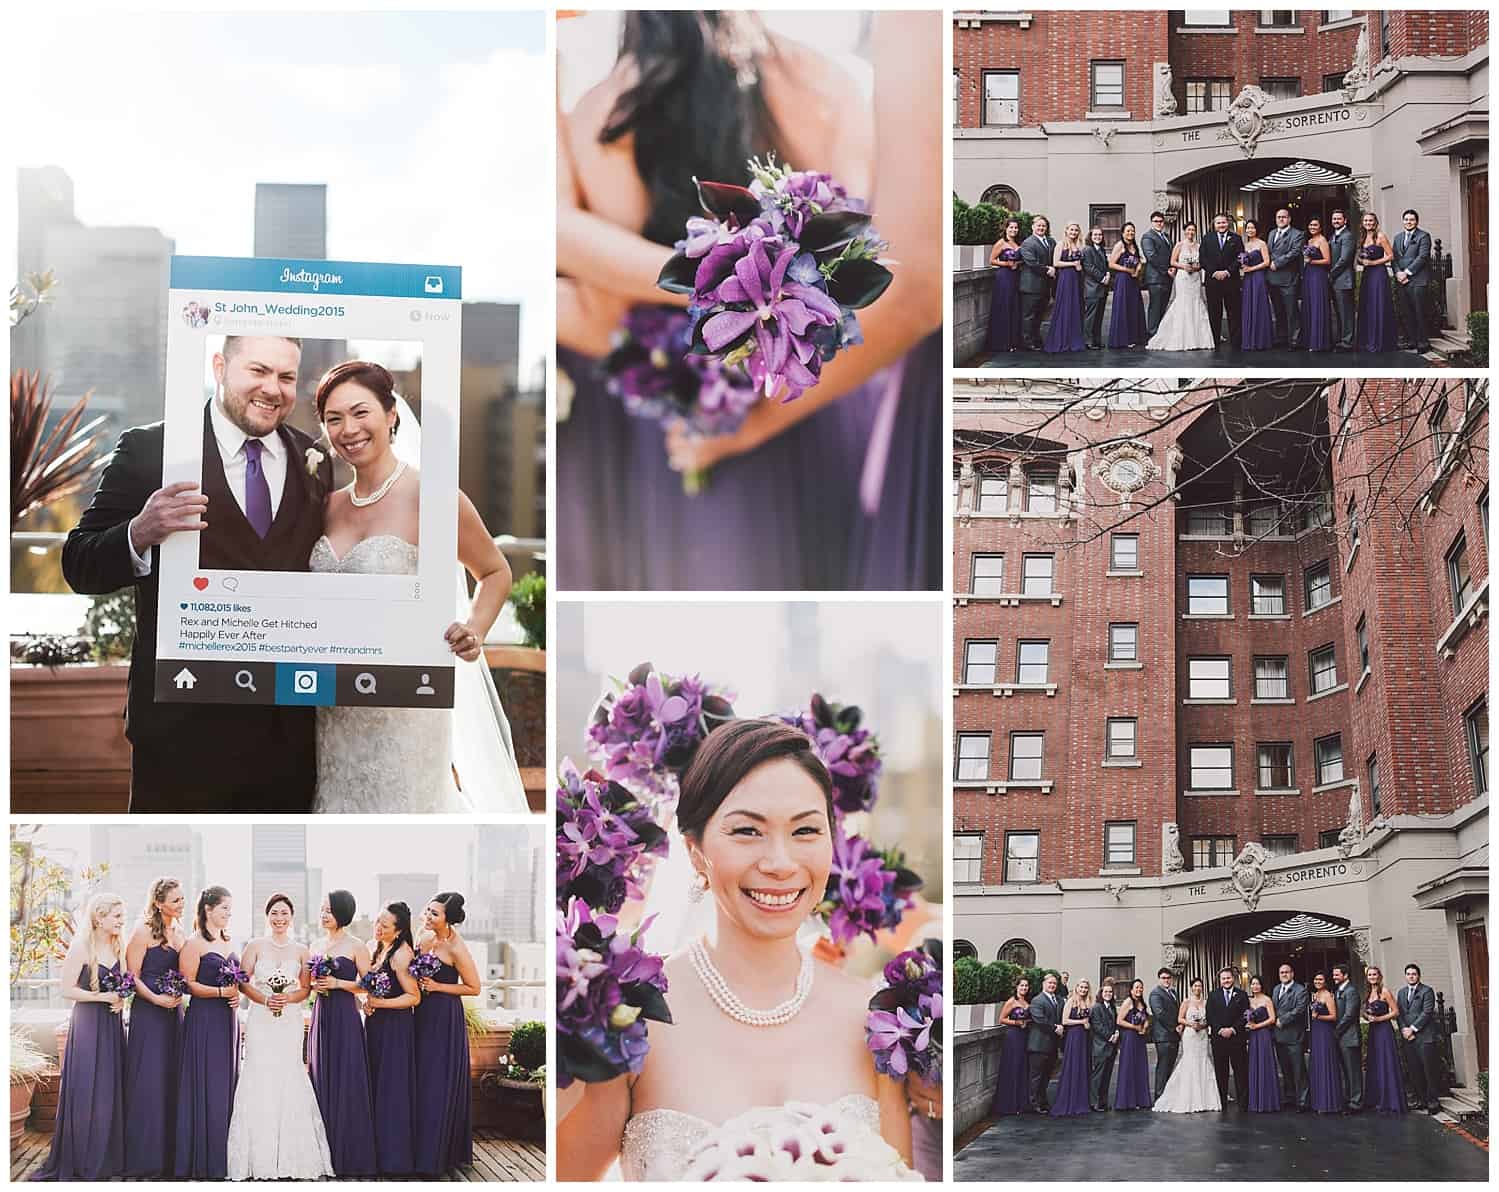 Hotel Sorrento wedding venue in Capitol Hill Seattle by Kyle Goldie of Luma Weddings